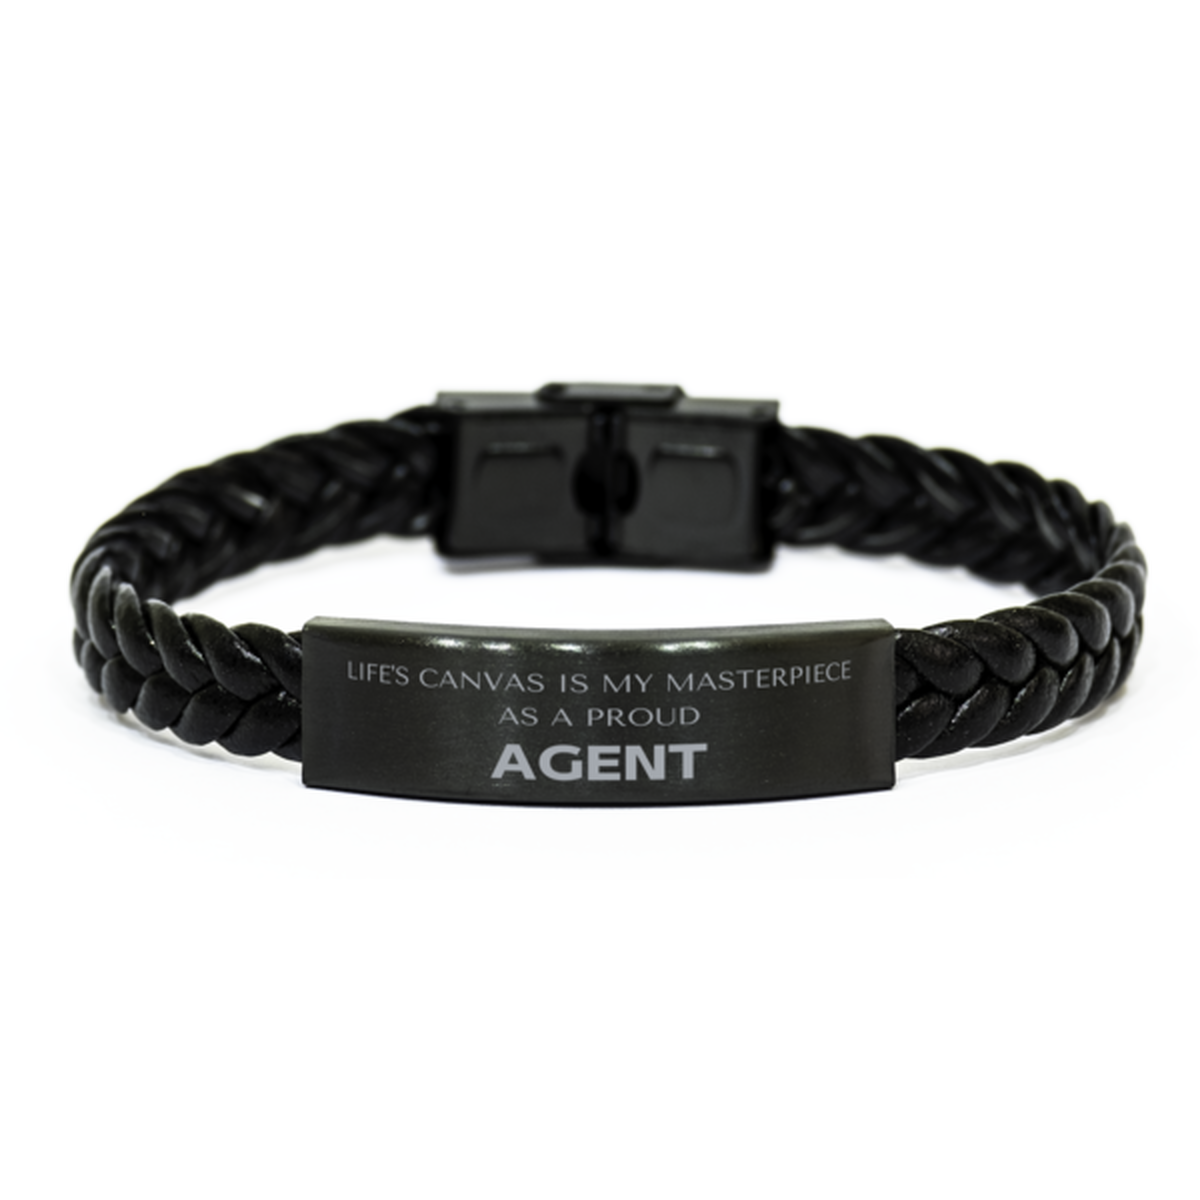 Proud Agent Gifts, Life's canvas is my masterpiece, Epic Birthday Christmas Unique Braided Leather Bracelet For Agent, Coworkers, Men, Women, Friends